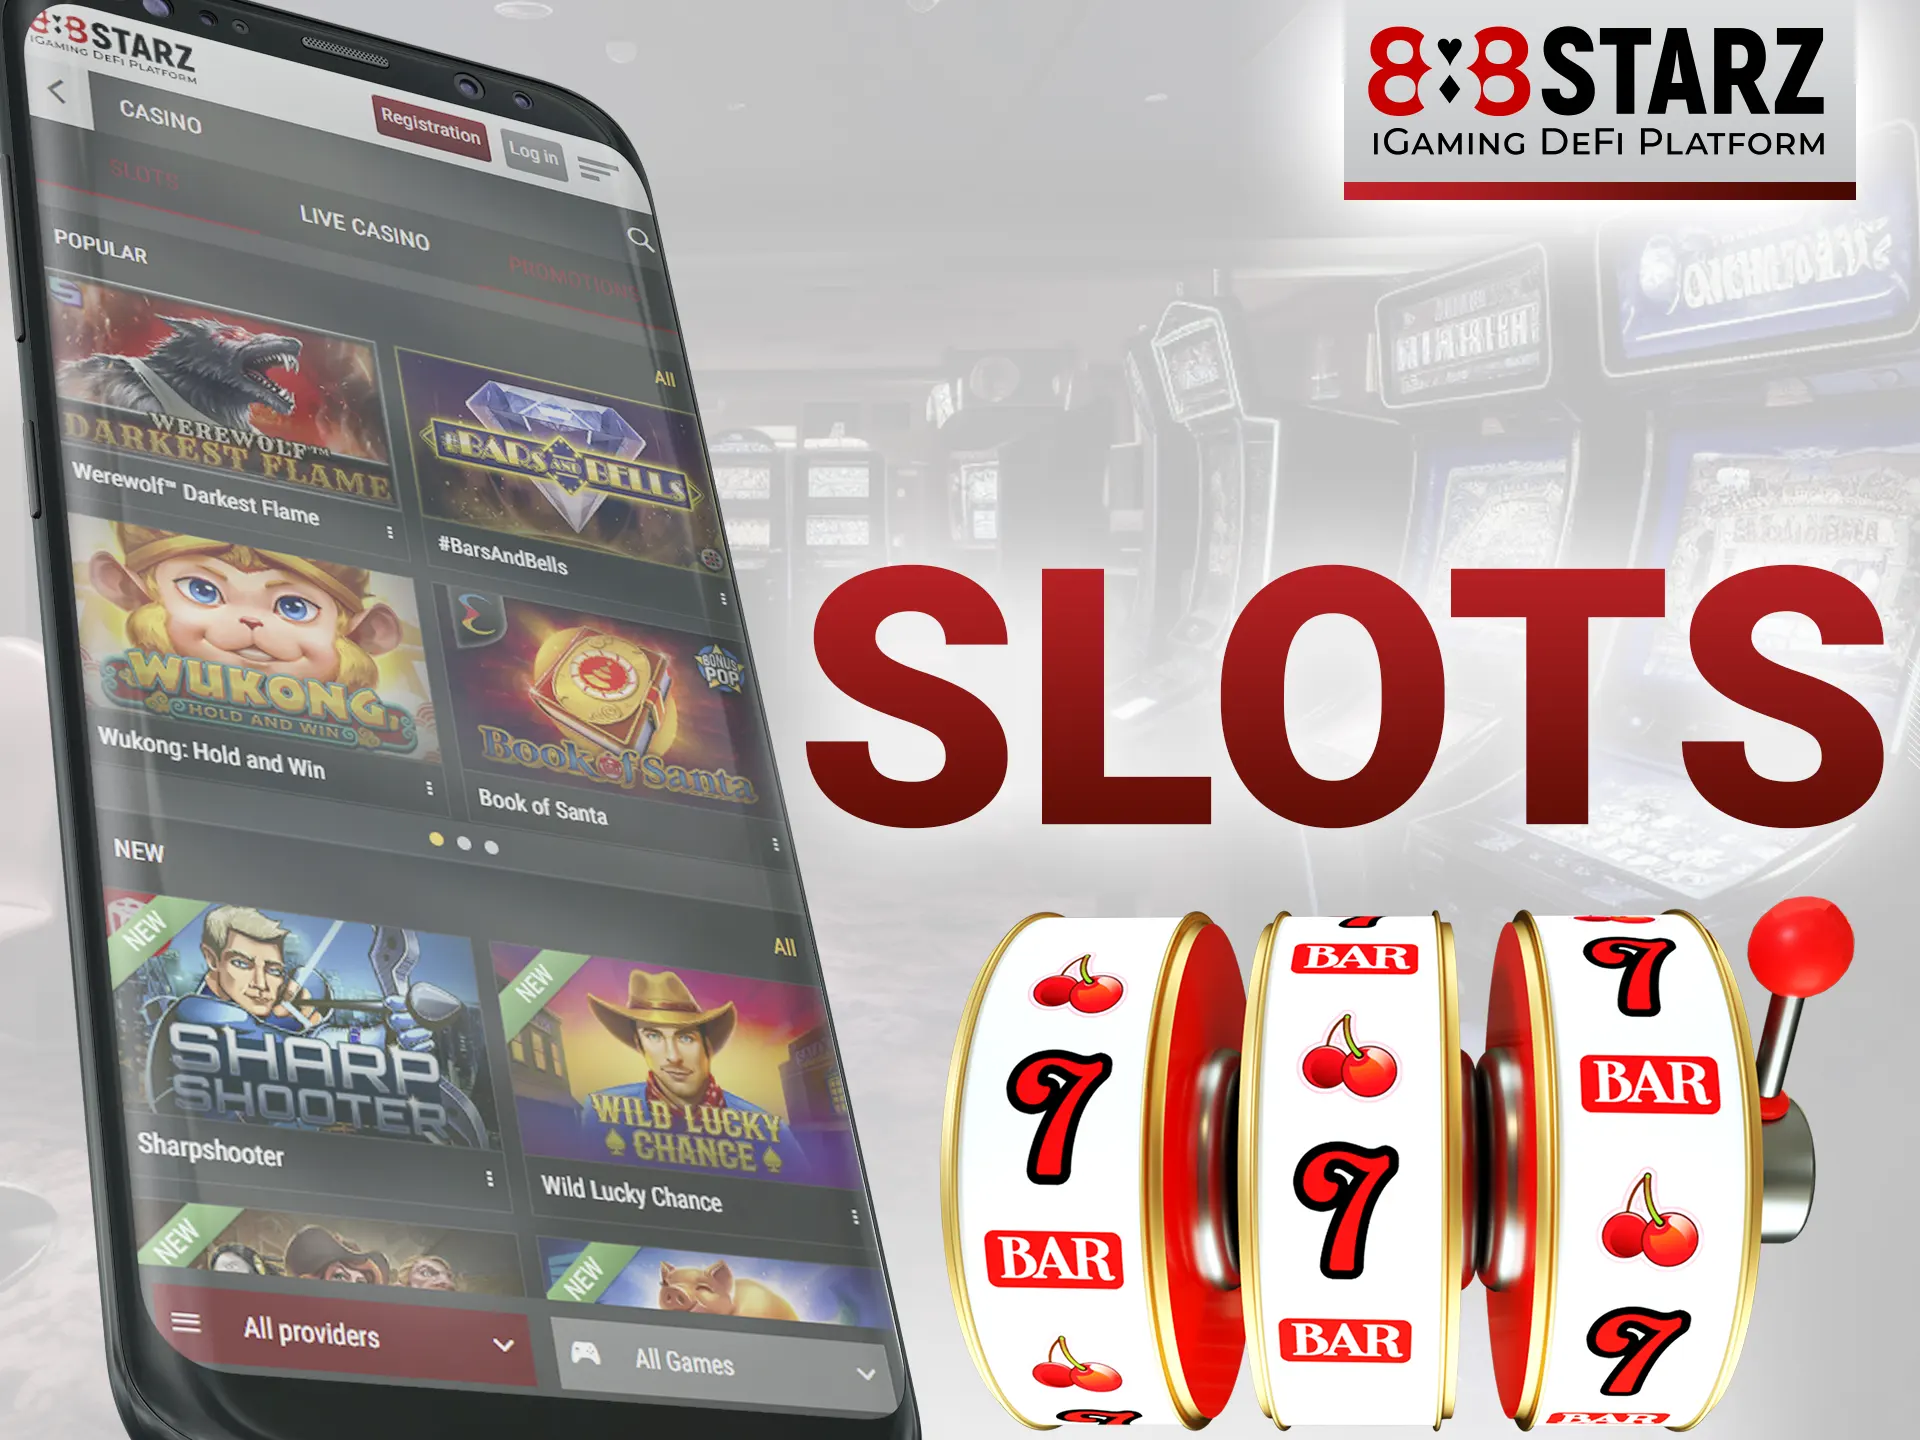 Play your favorite types of slots at 888Starz.